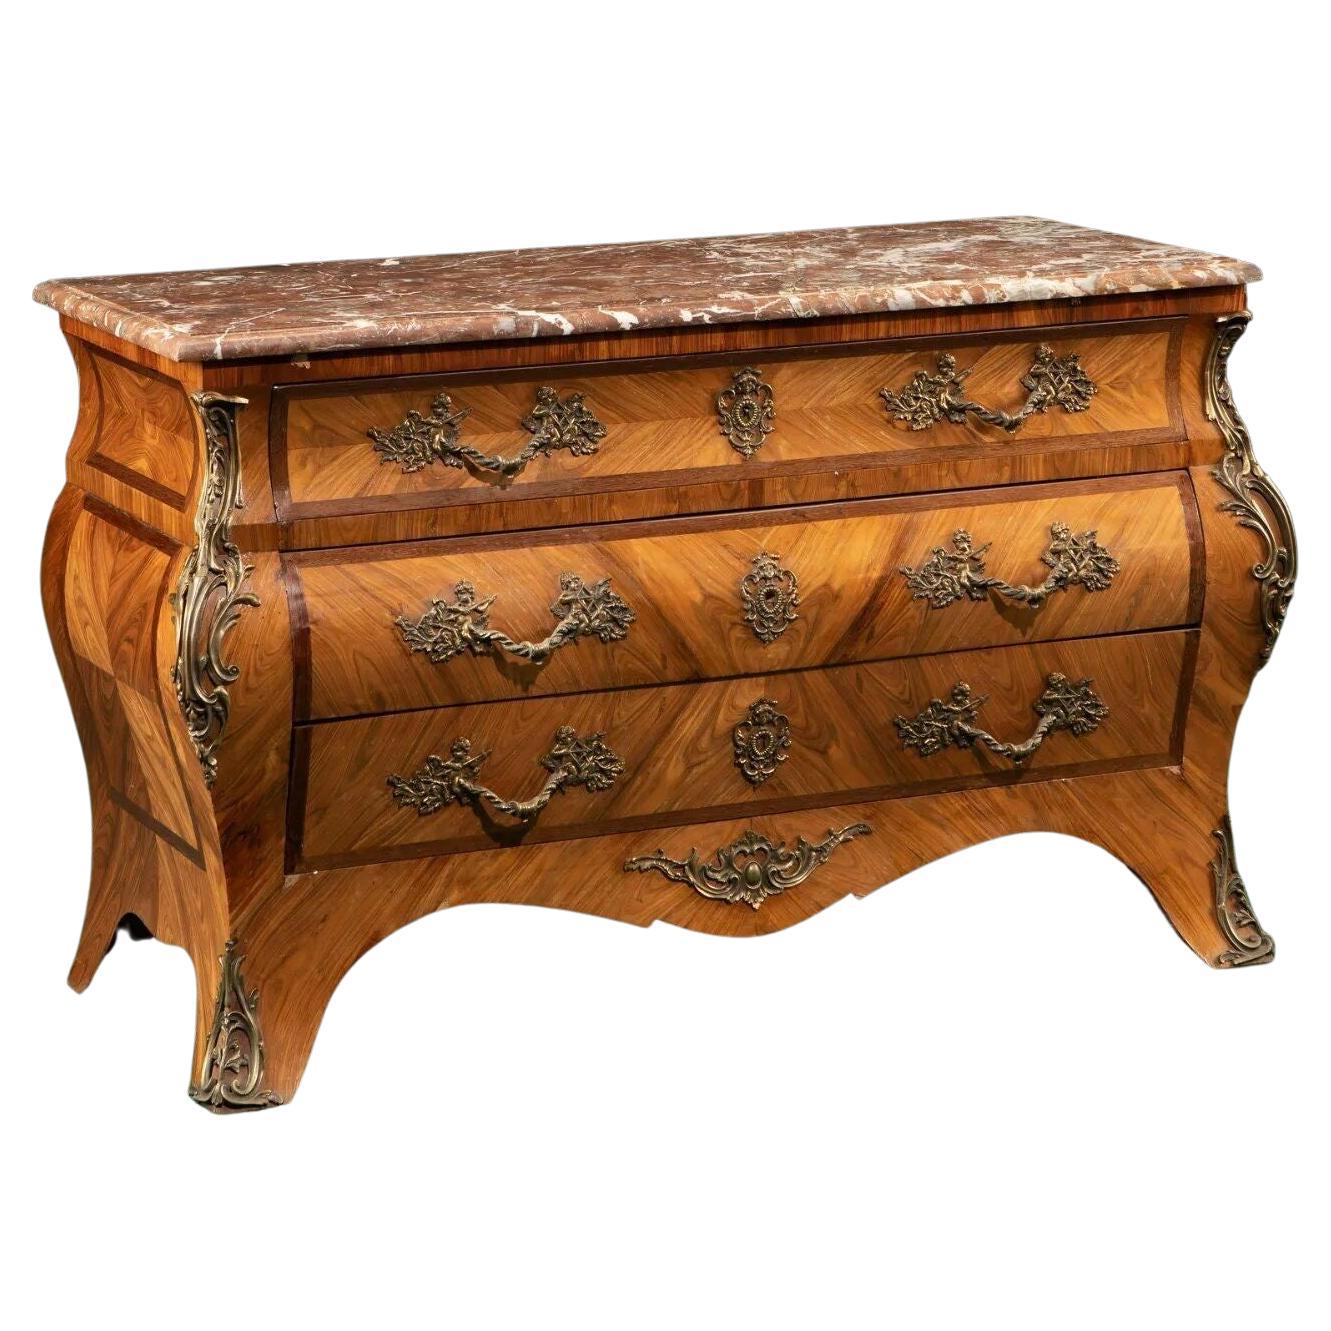 Late 19th Century French Louis XV-Style Bombe Commode